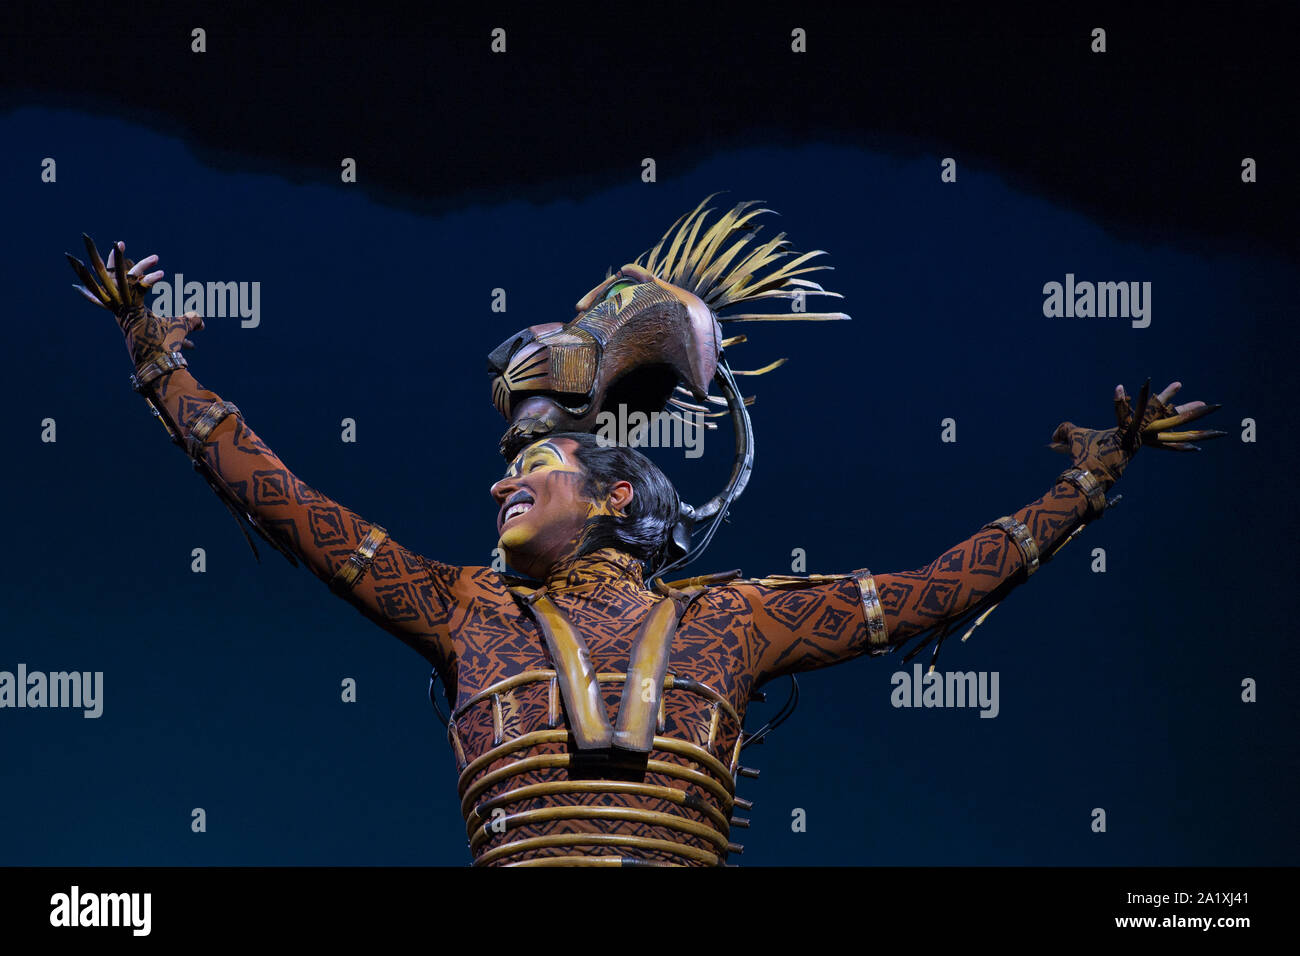 Actors perform during the musical The Lion King (El Rey Leon) in Madrid,  Spain, 29 August 2019 Featuring: Atmosphere Where: Madrid, Spain When: 29  Aug 2019 Credit: Oscar Gonzalez/WENN.com Stock Photo - Alamy